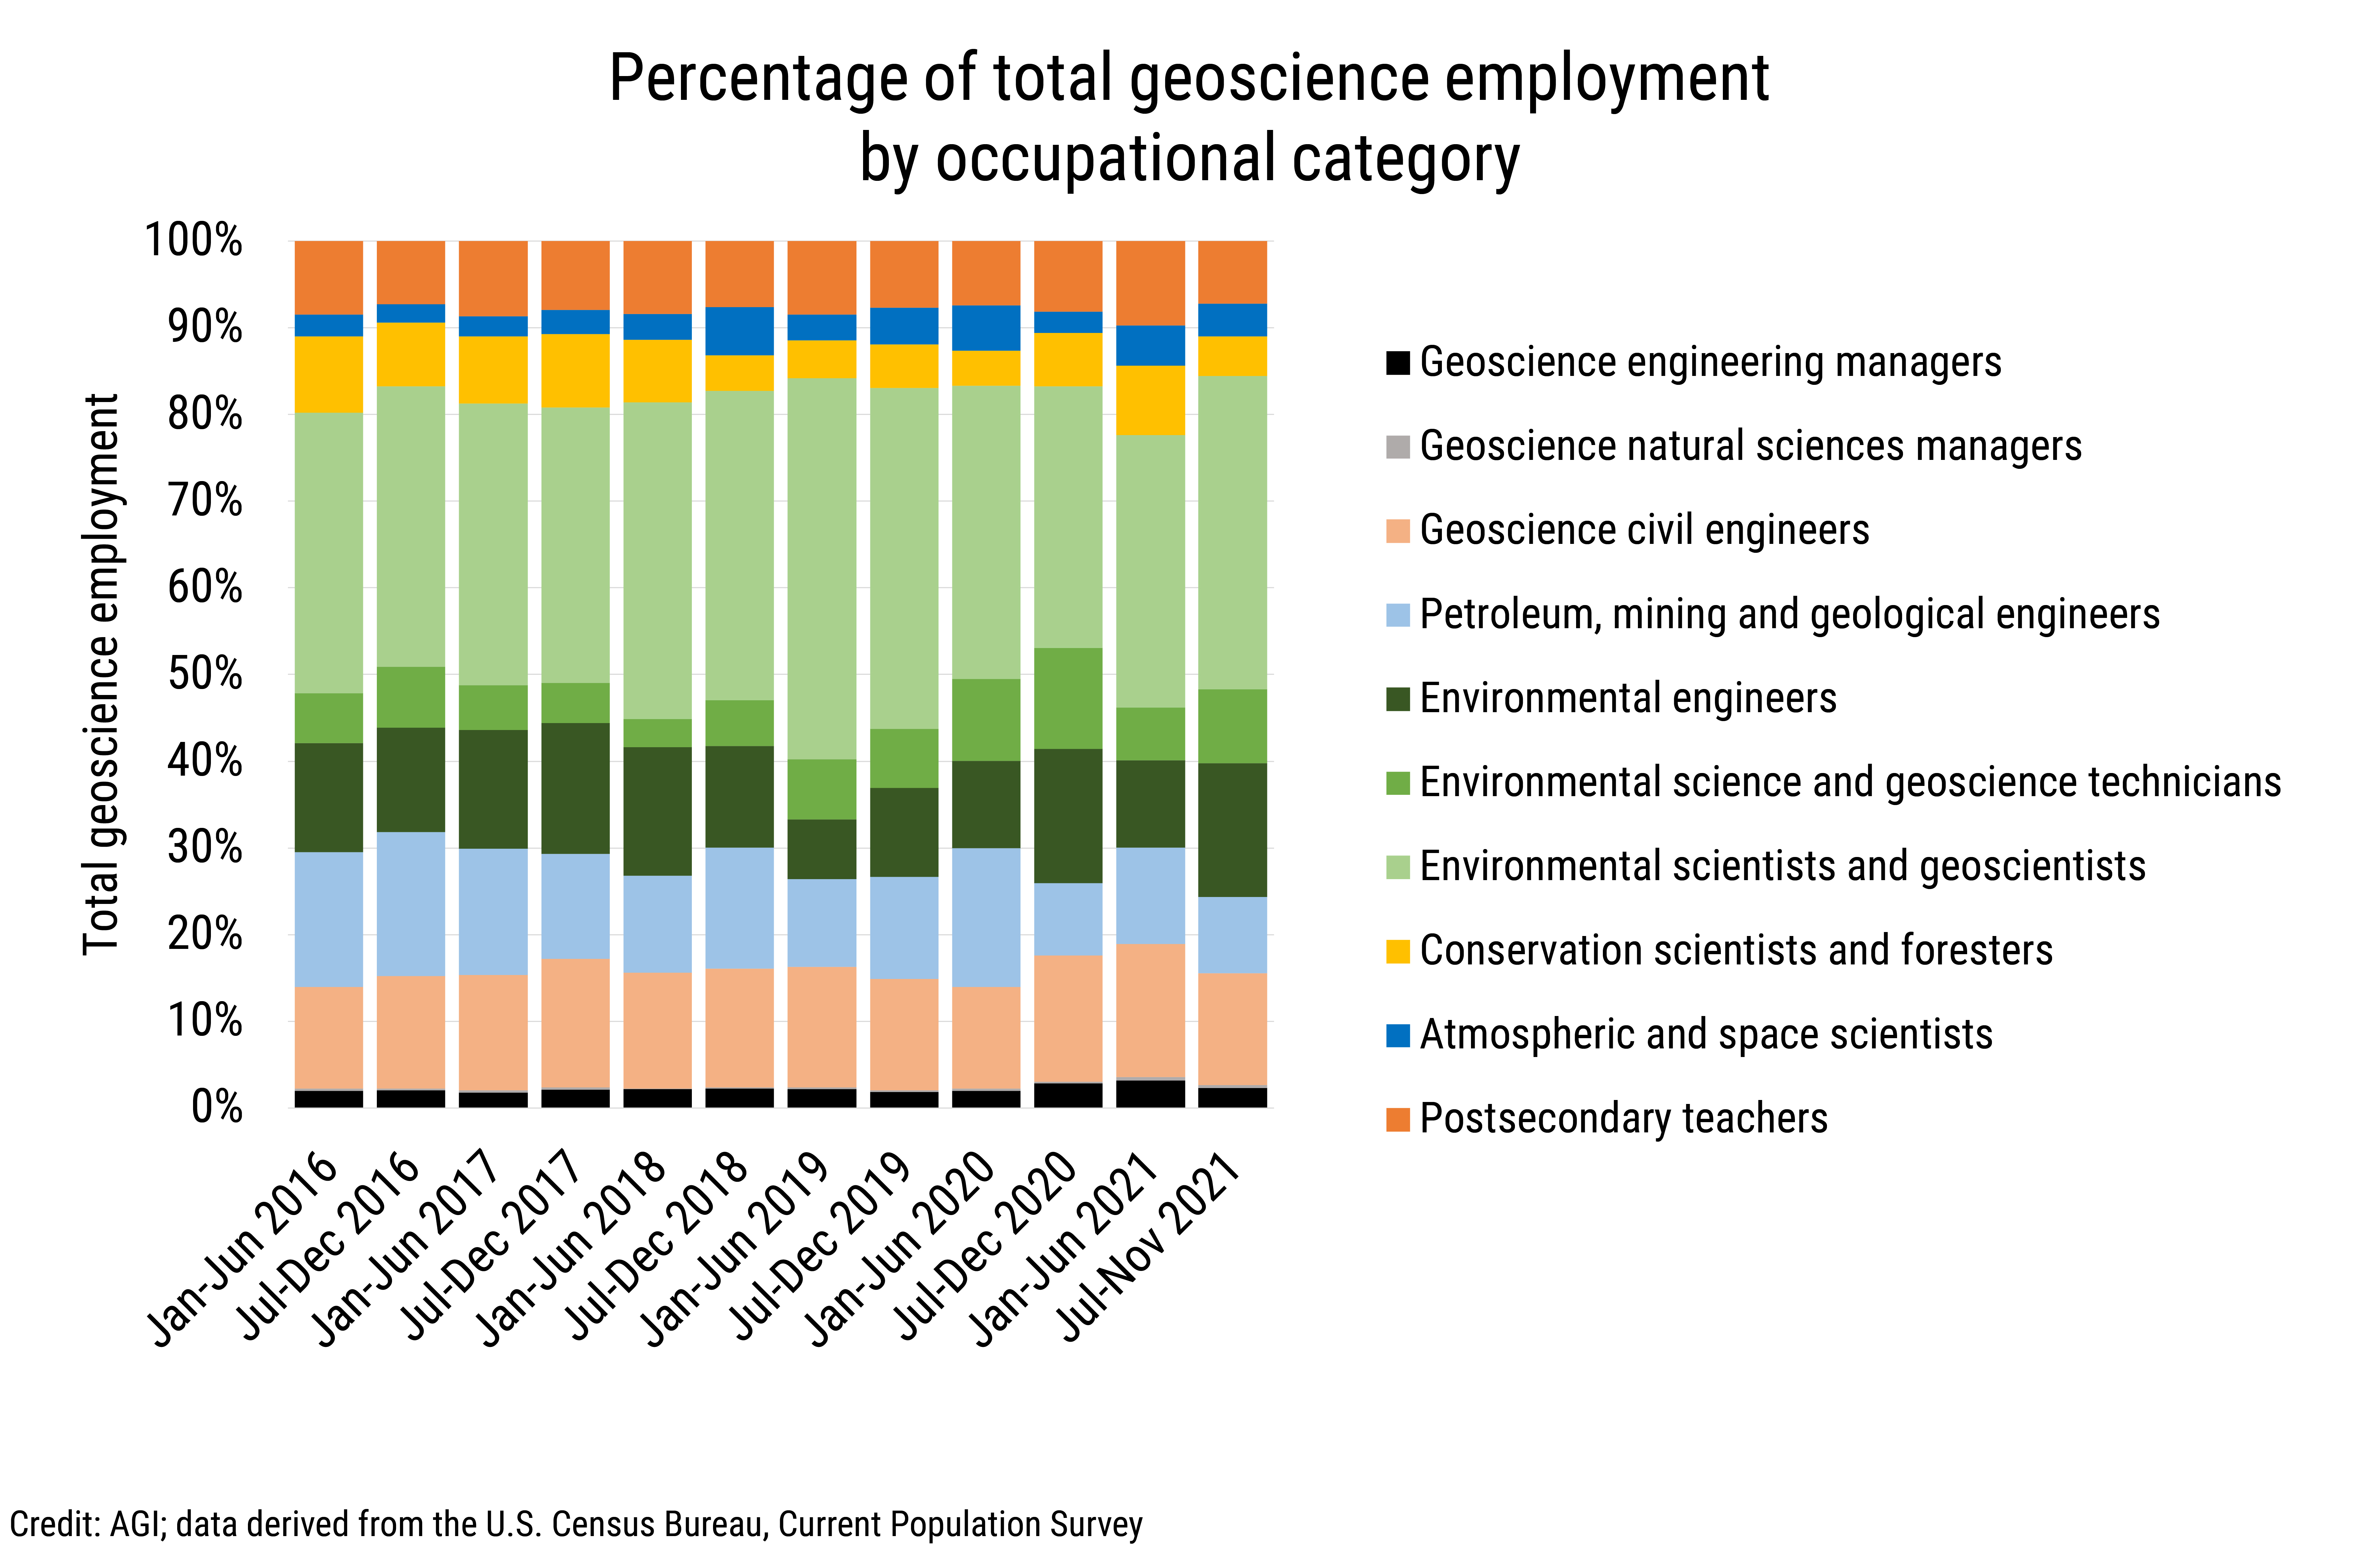 DB_2022-001 chart 02: Percentage of total geoscience employment by occupational category (Credit: AGI; data derived from the U.S. Census Bureau, Current Population Survey)